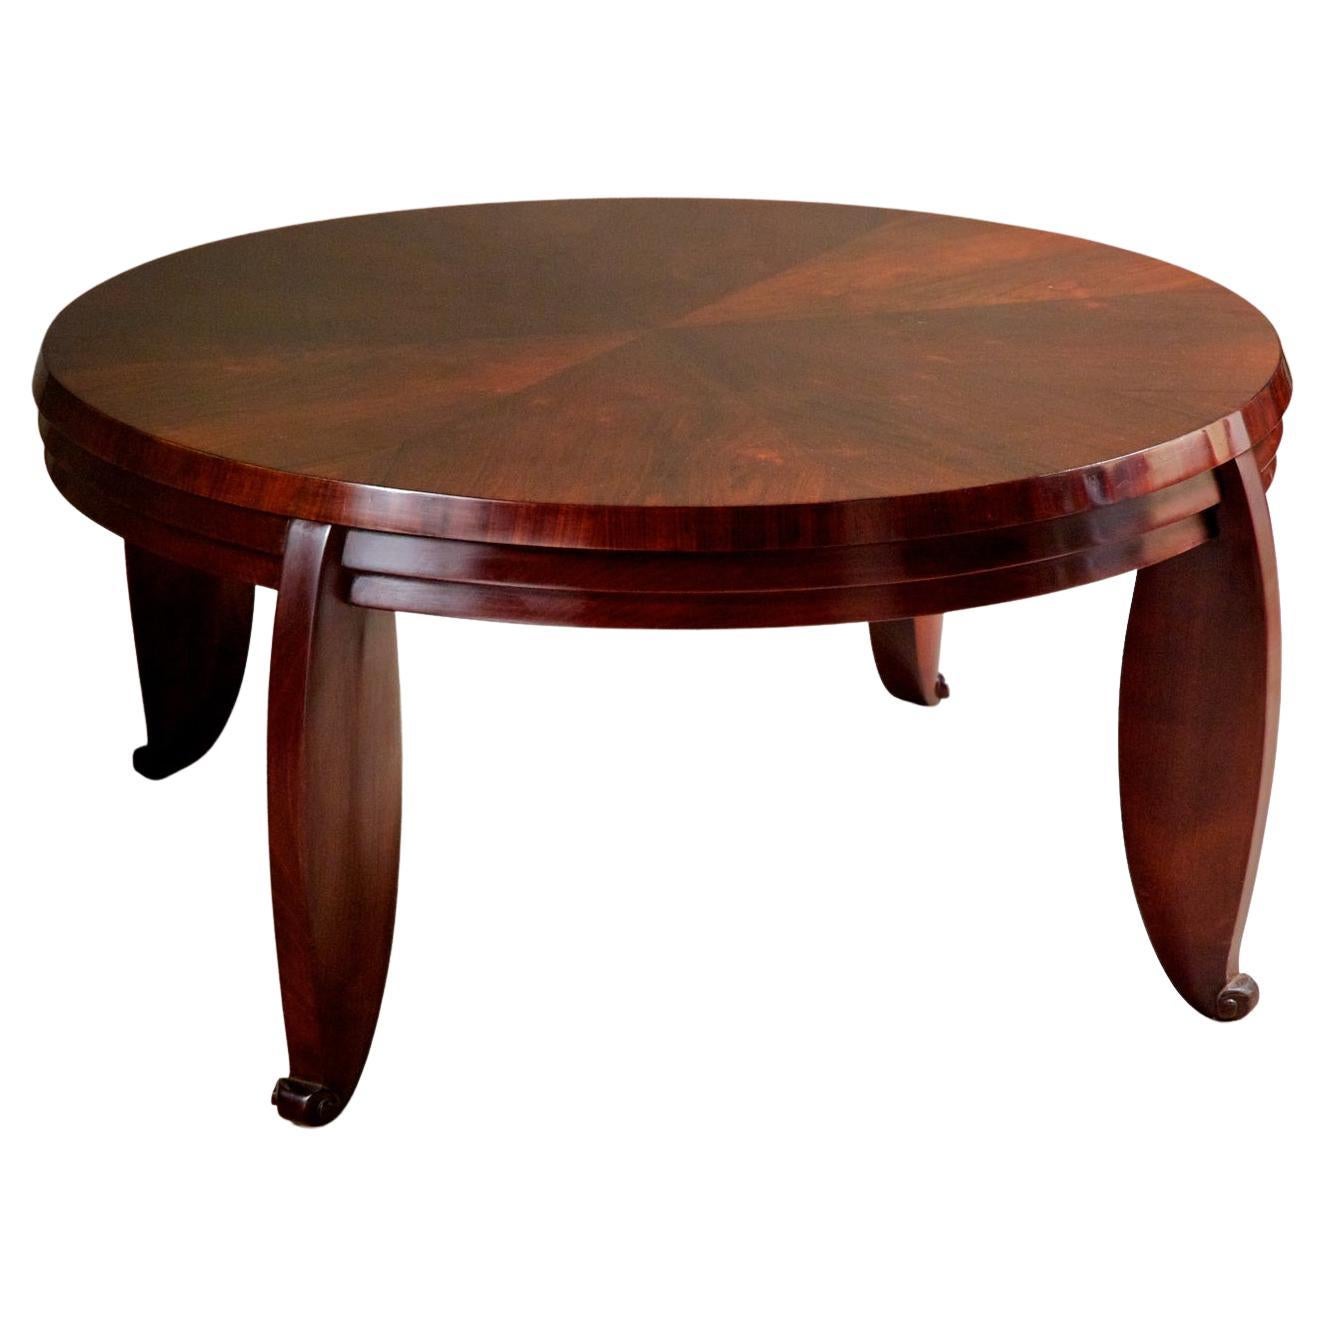 Maurice Dufrene Low Table